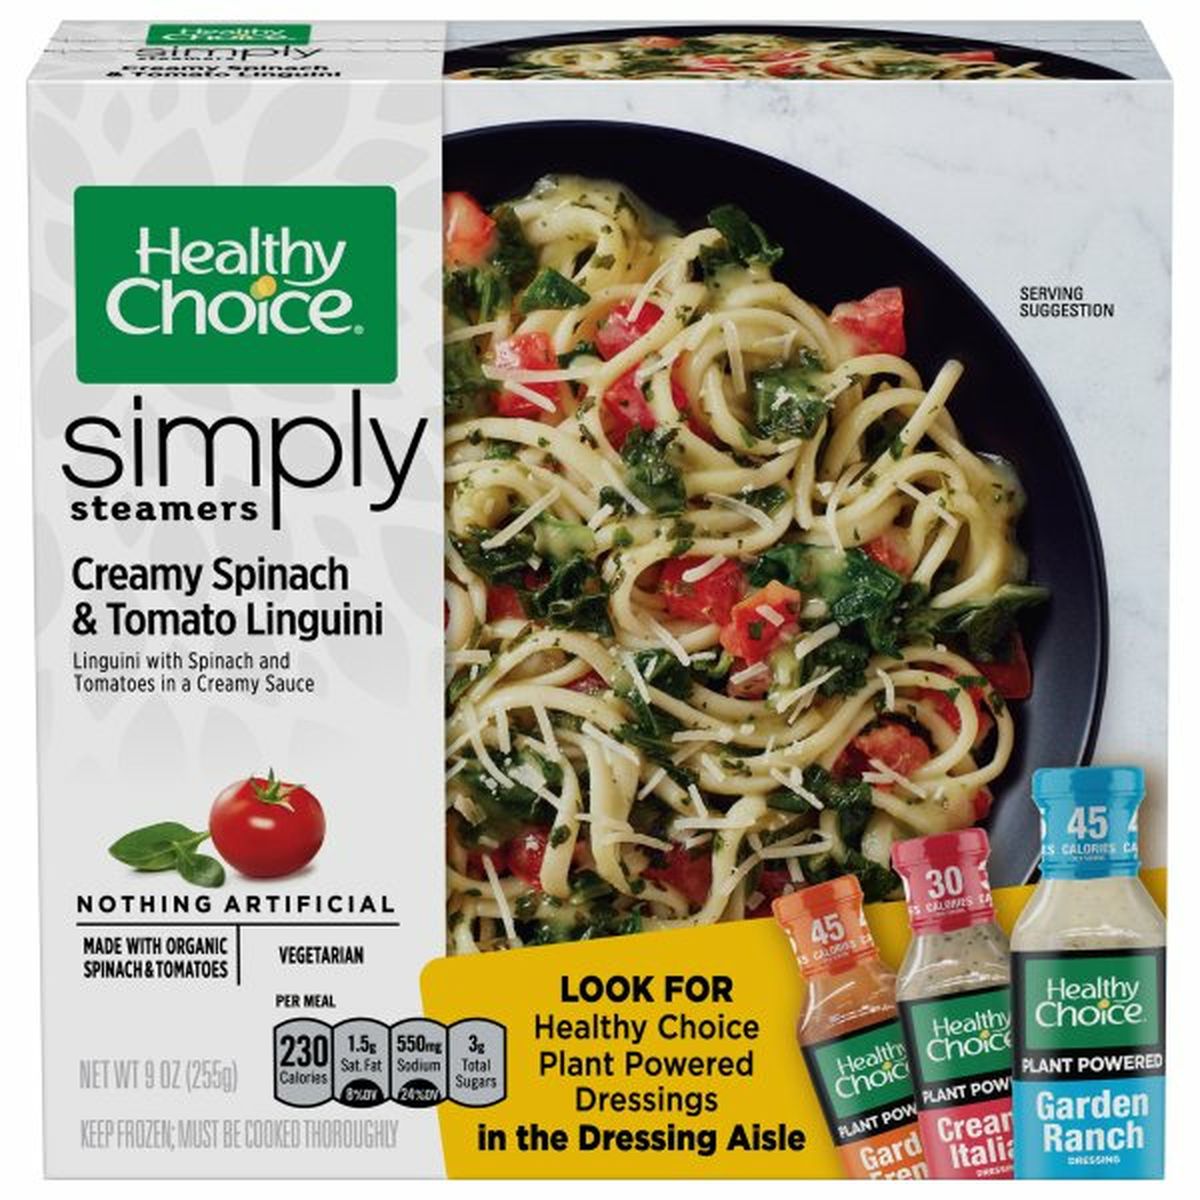 Calories in Healthy Choice Simply Steamers Creamy Spinach & Tomato Linguini